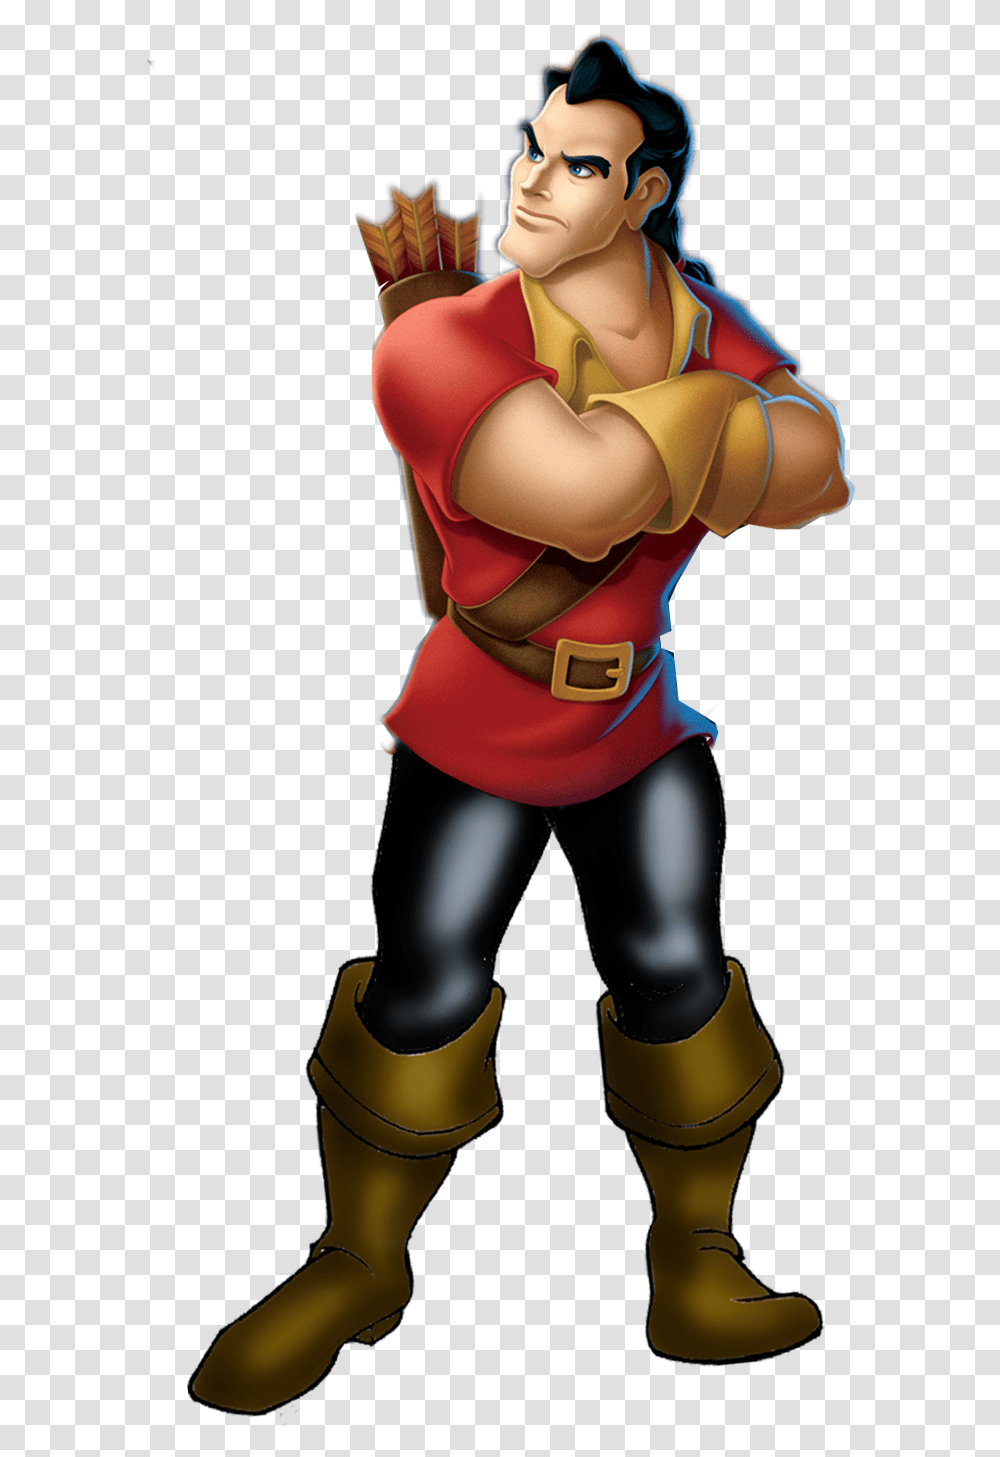 Love Rival Wiki Gaston Beauty And The Beast, Person, Human, Clothing, Apparel Transparent Png